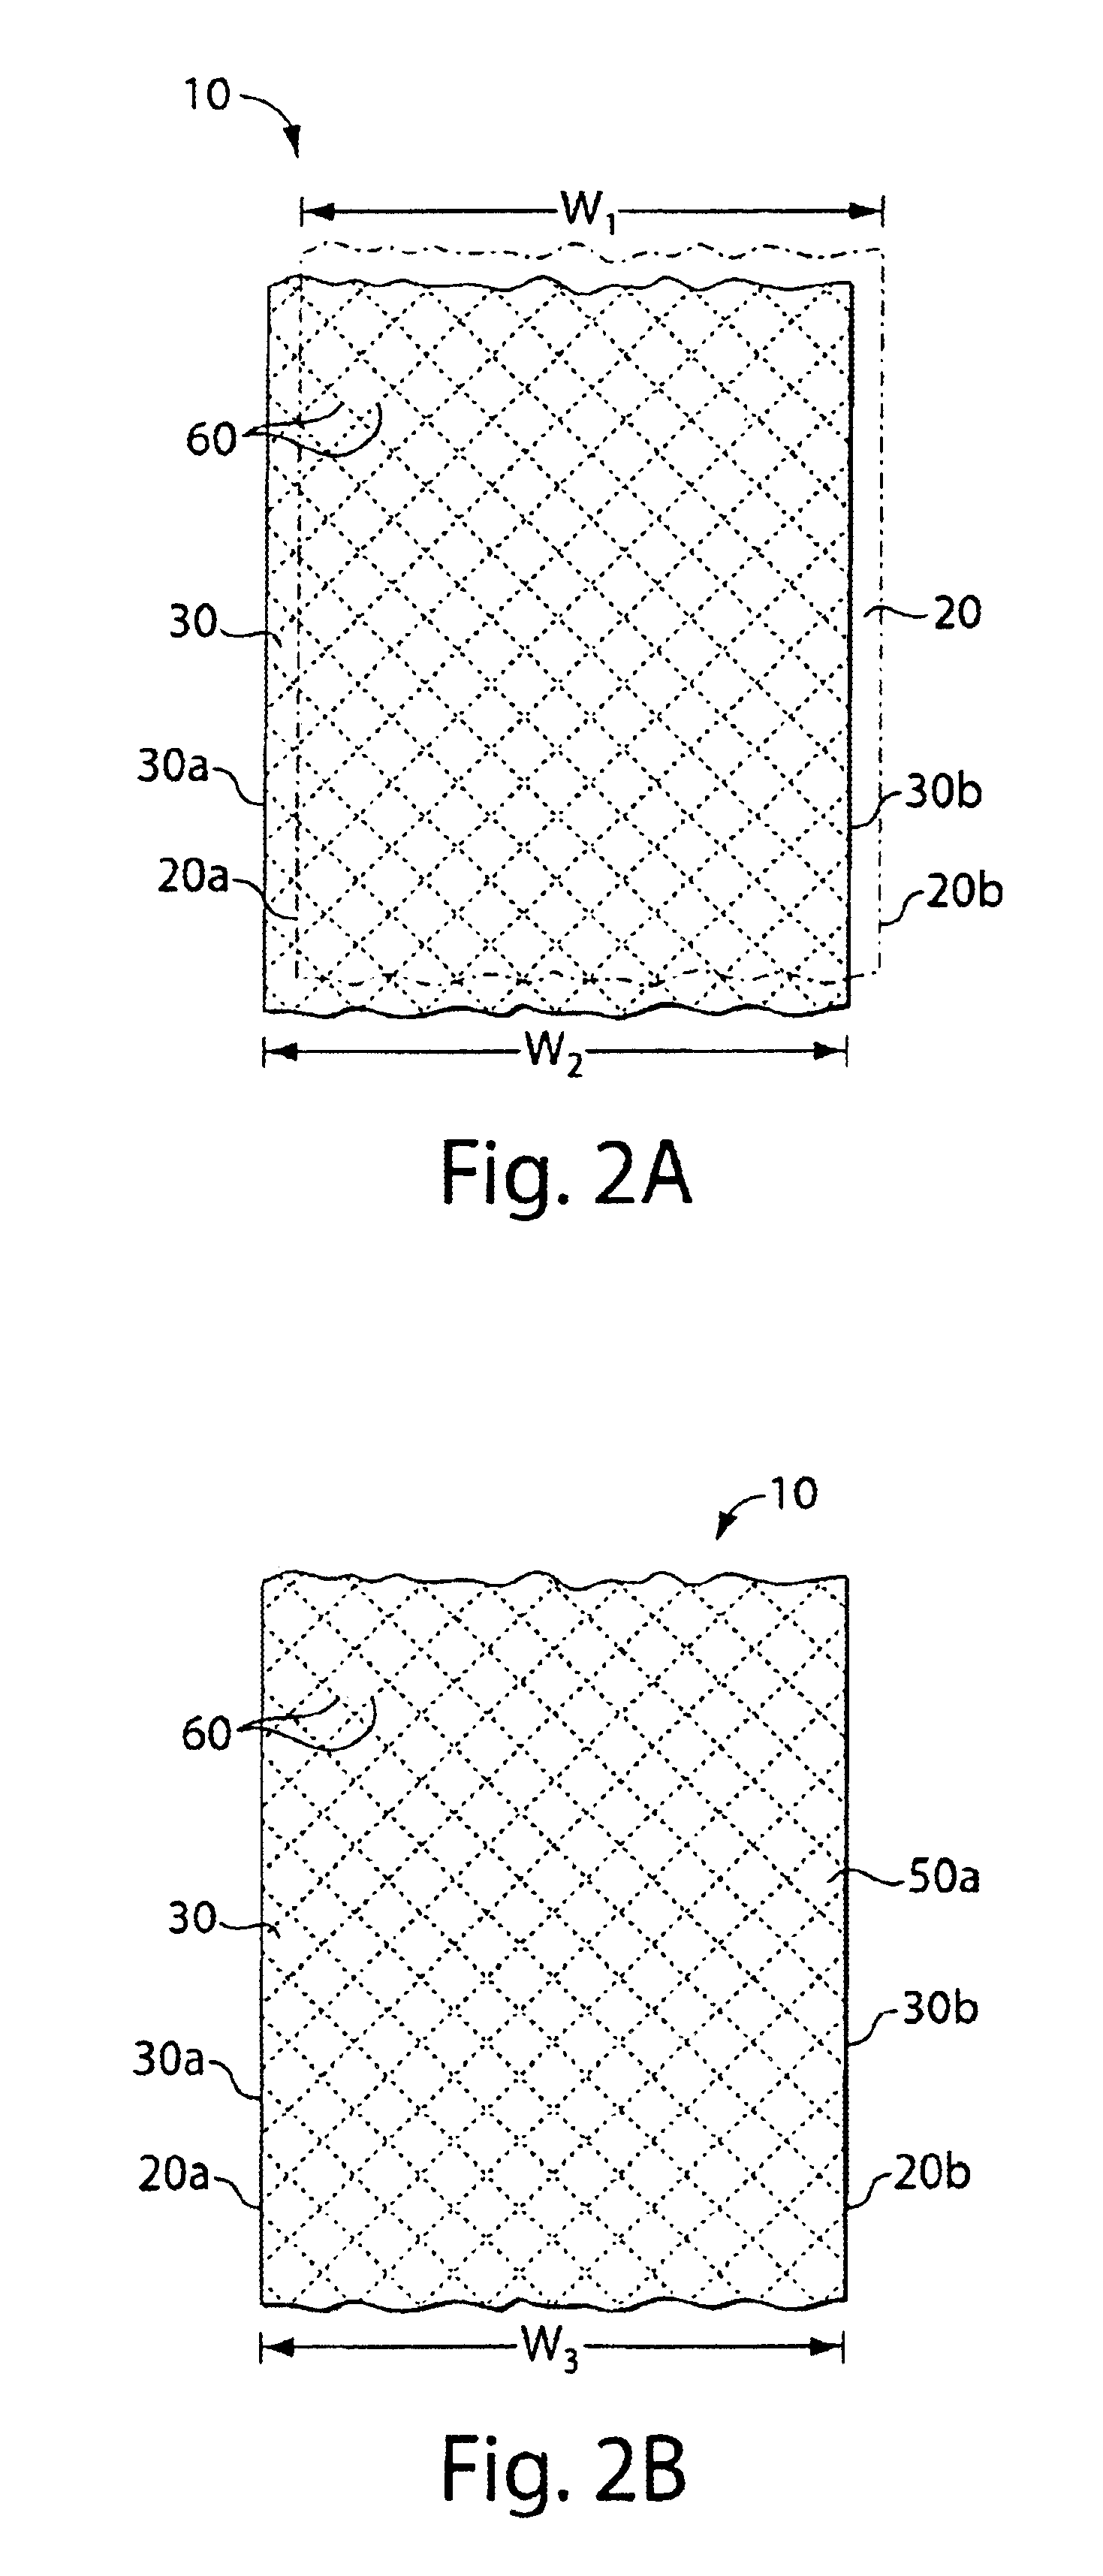 Water blocking cable tape and methods for making same